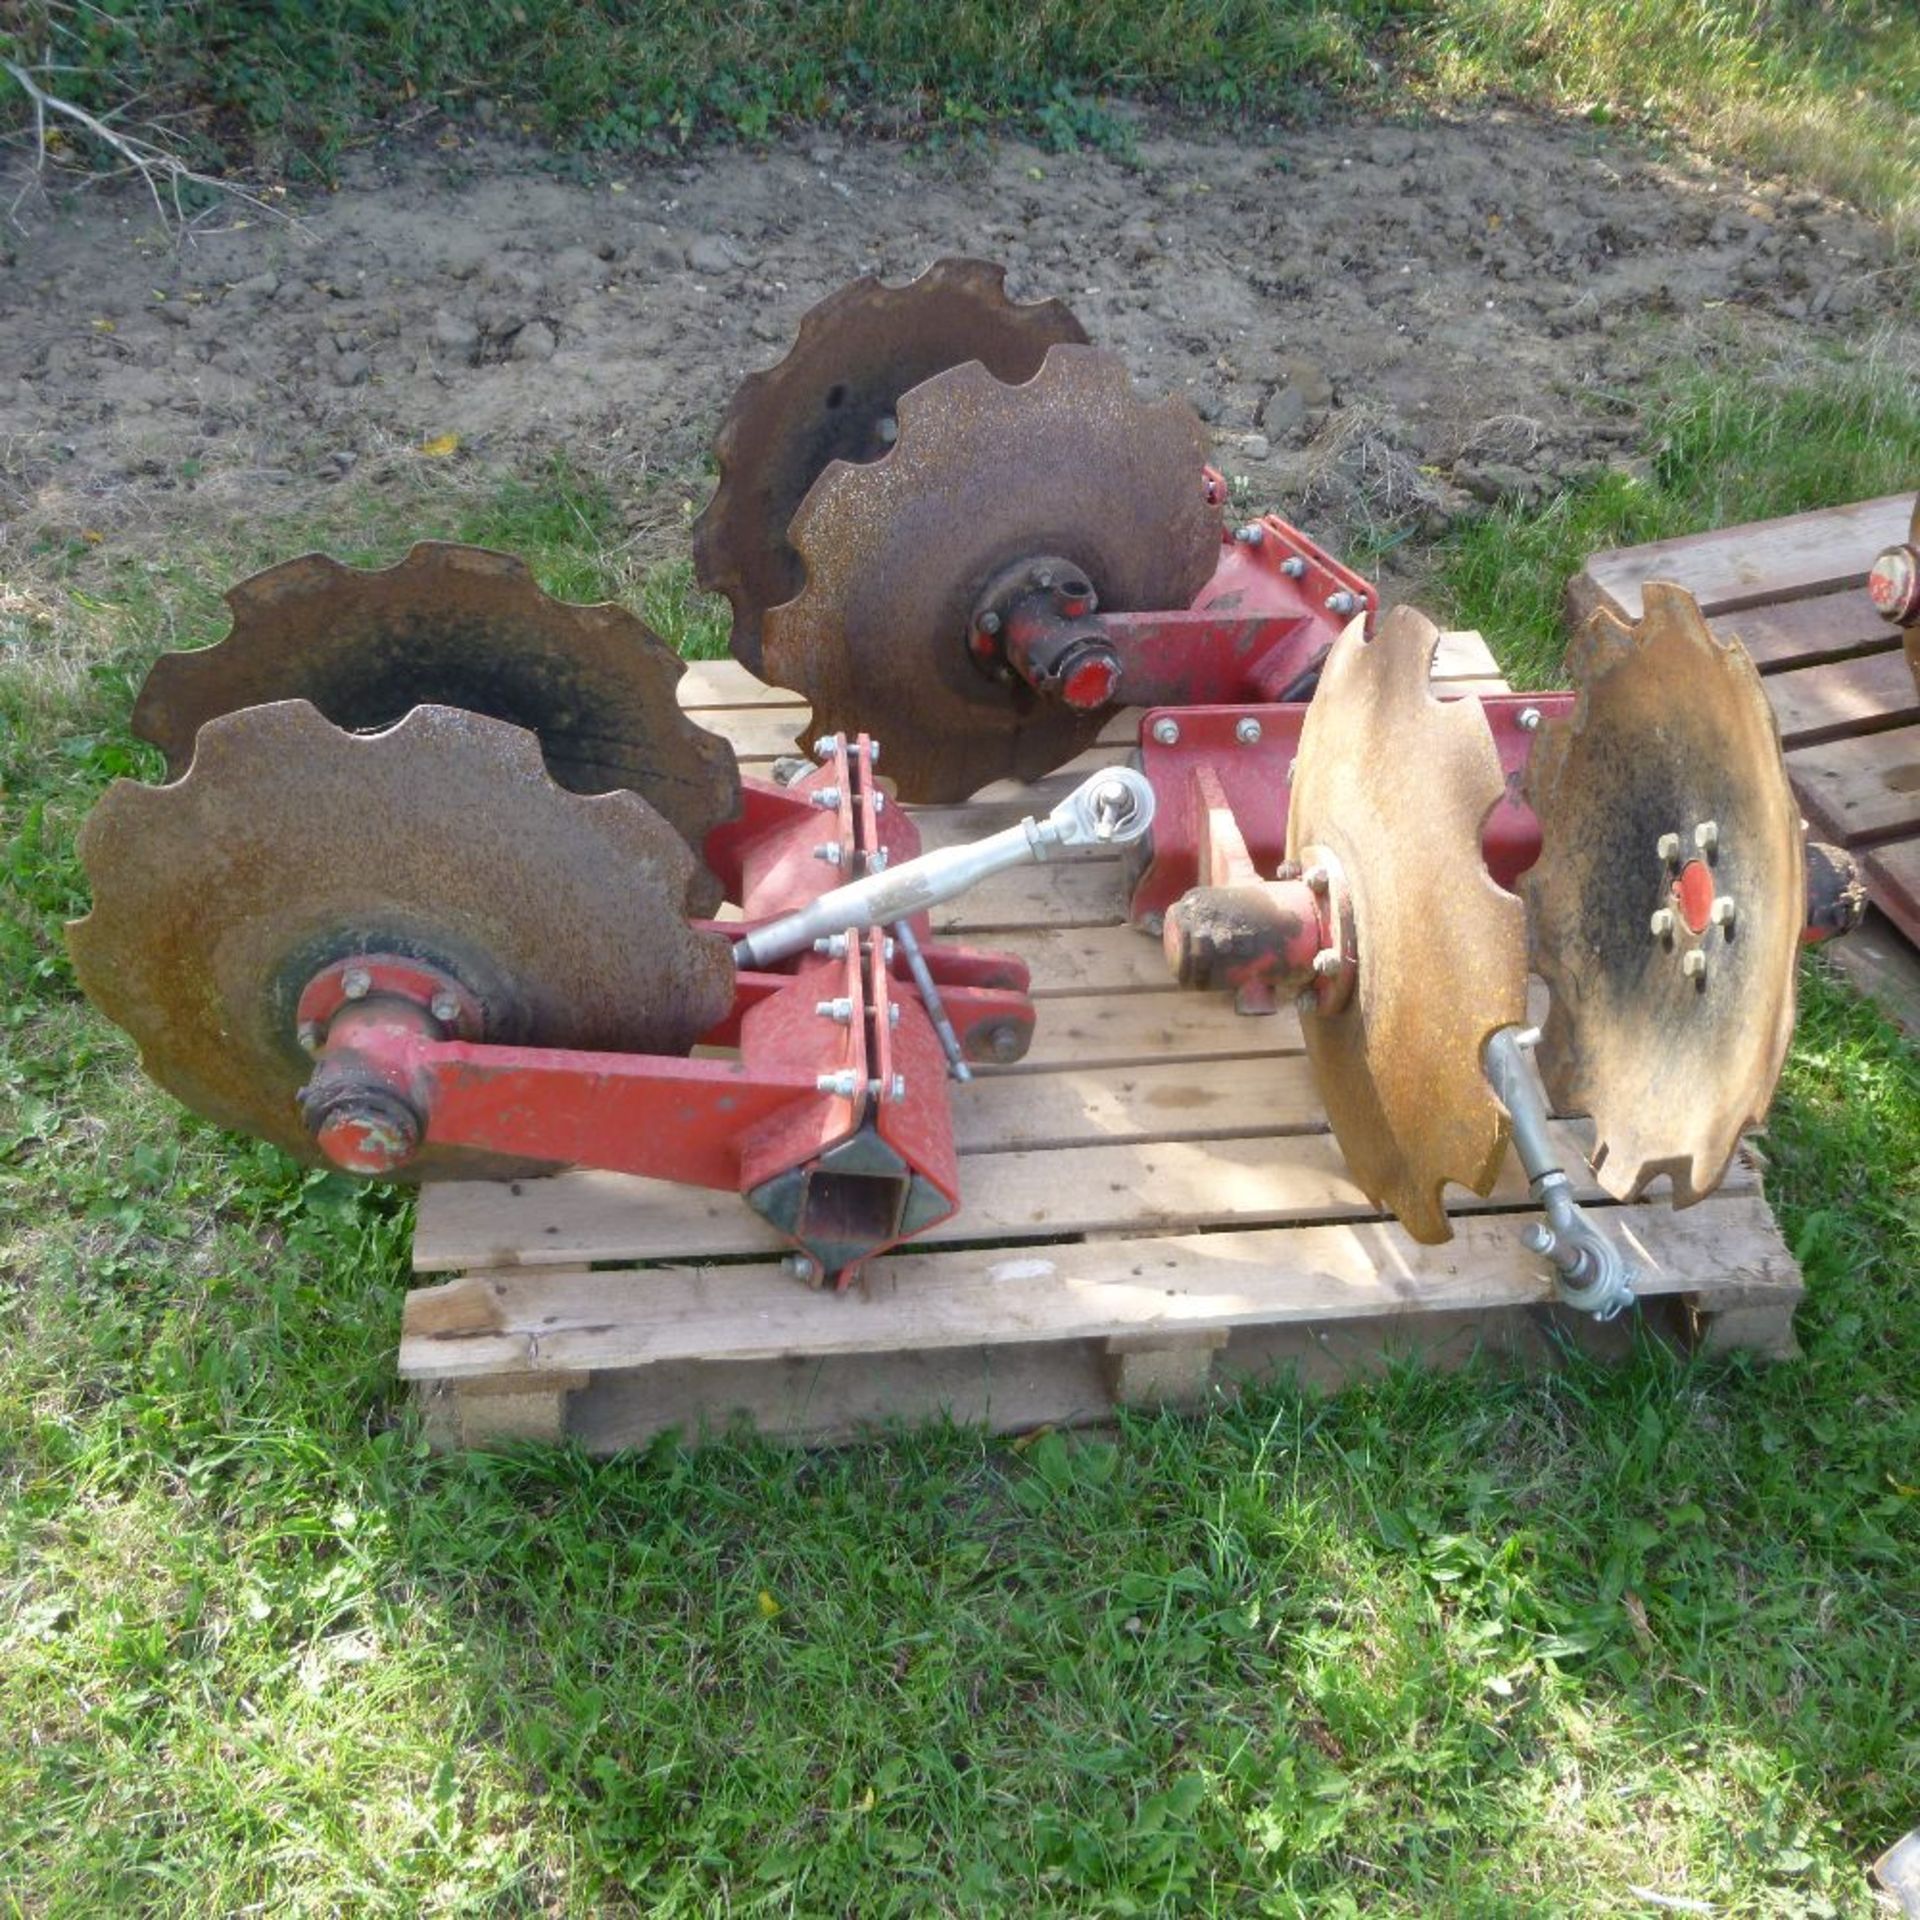 HE - VA 5 tine subsoiler with roll (SN28588) and air seeder unit, c/w homemade attachment for discs, - Image 4 of 7